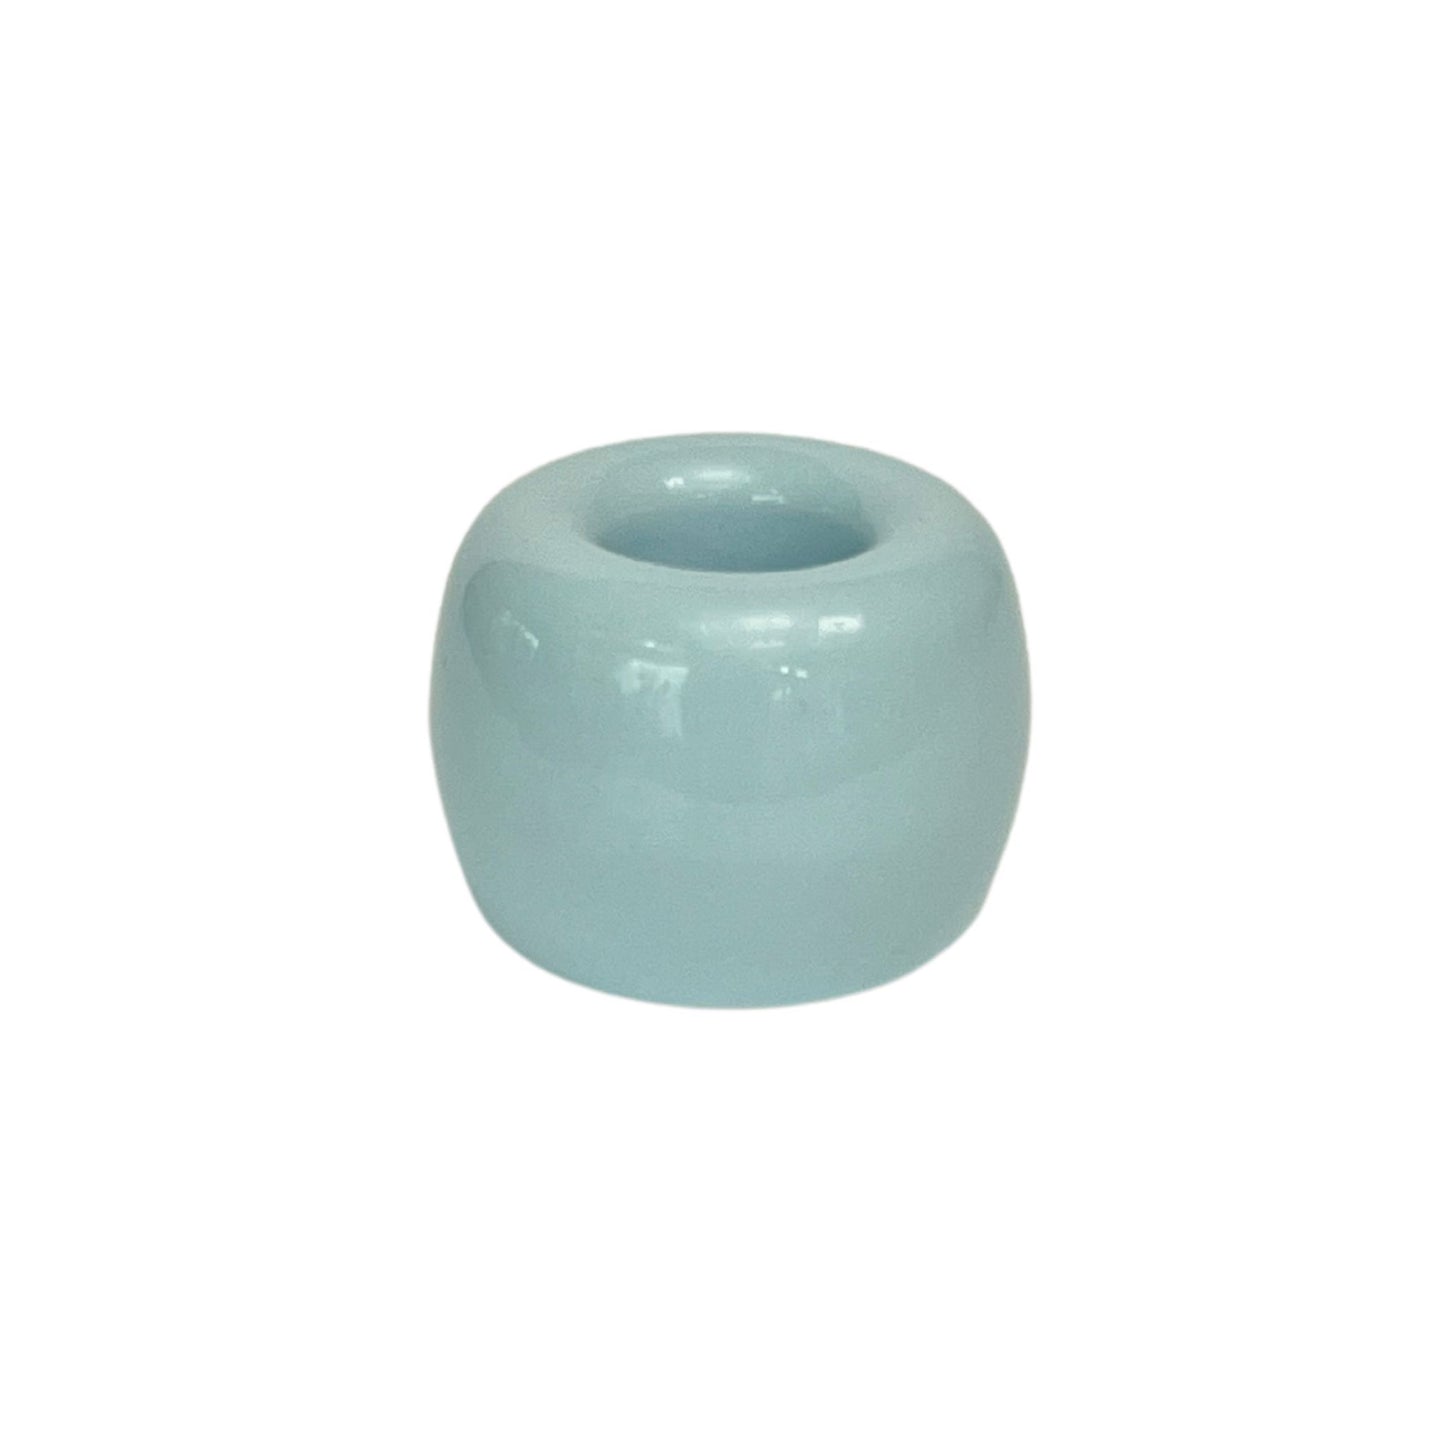 small ceramic toothbrush holder in glossy blue finish